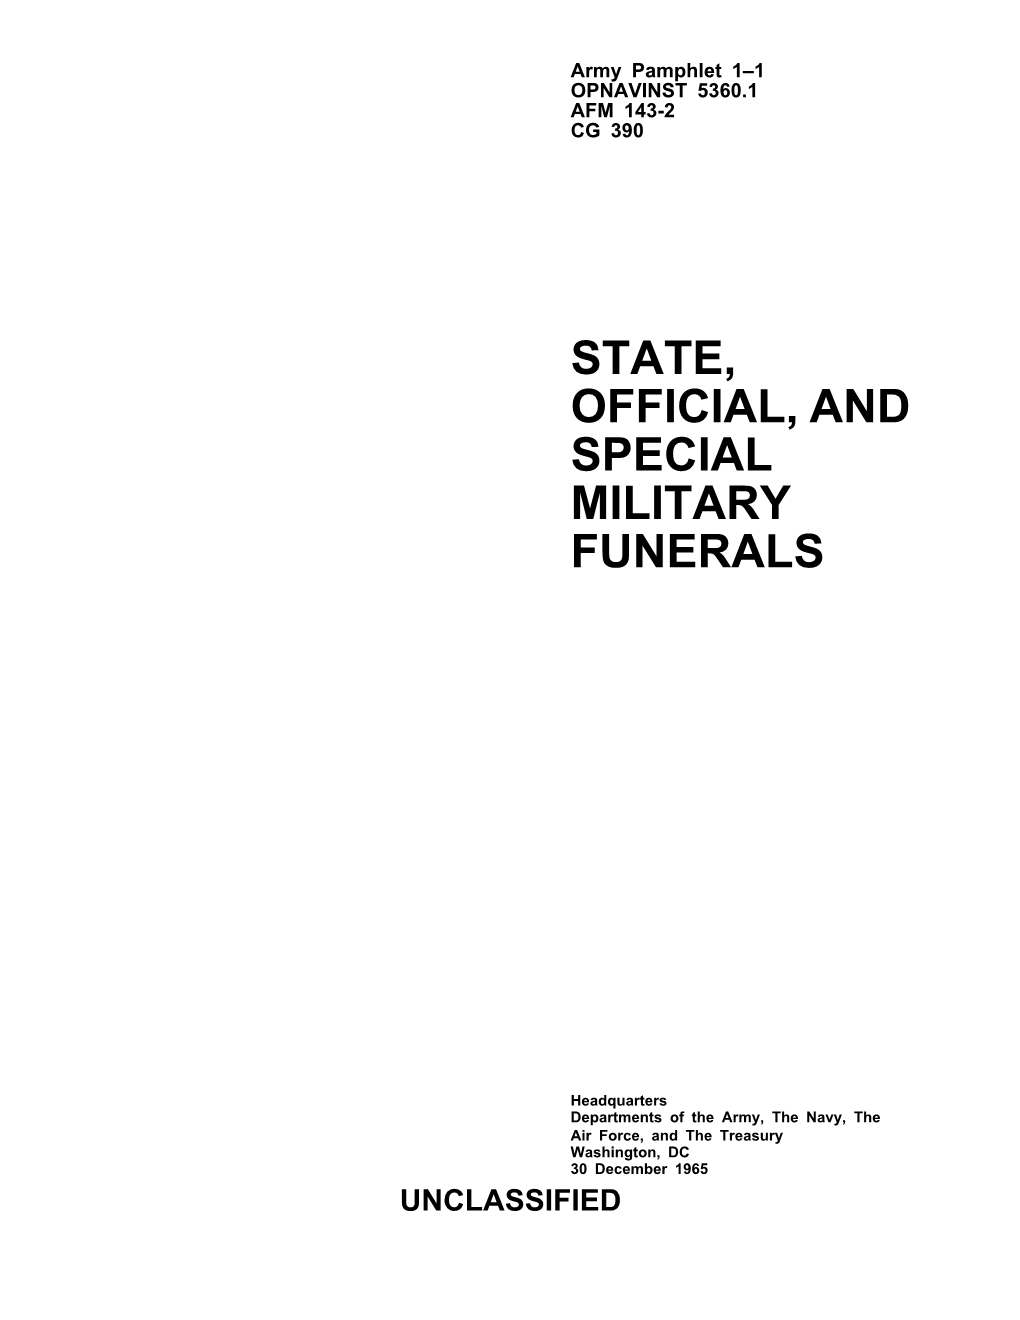 State, Official, and Special Military Funerals